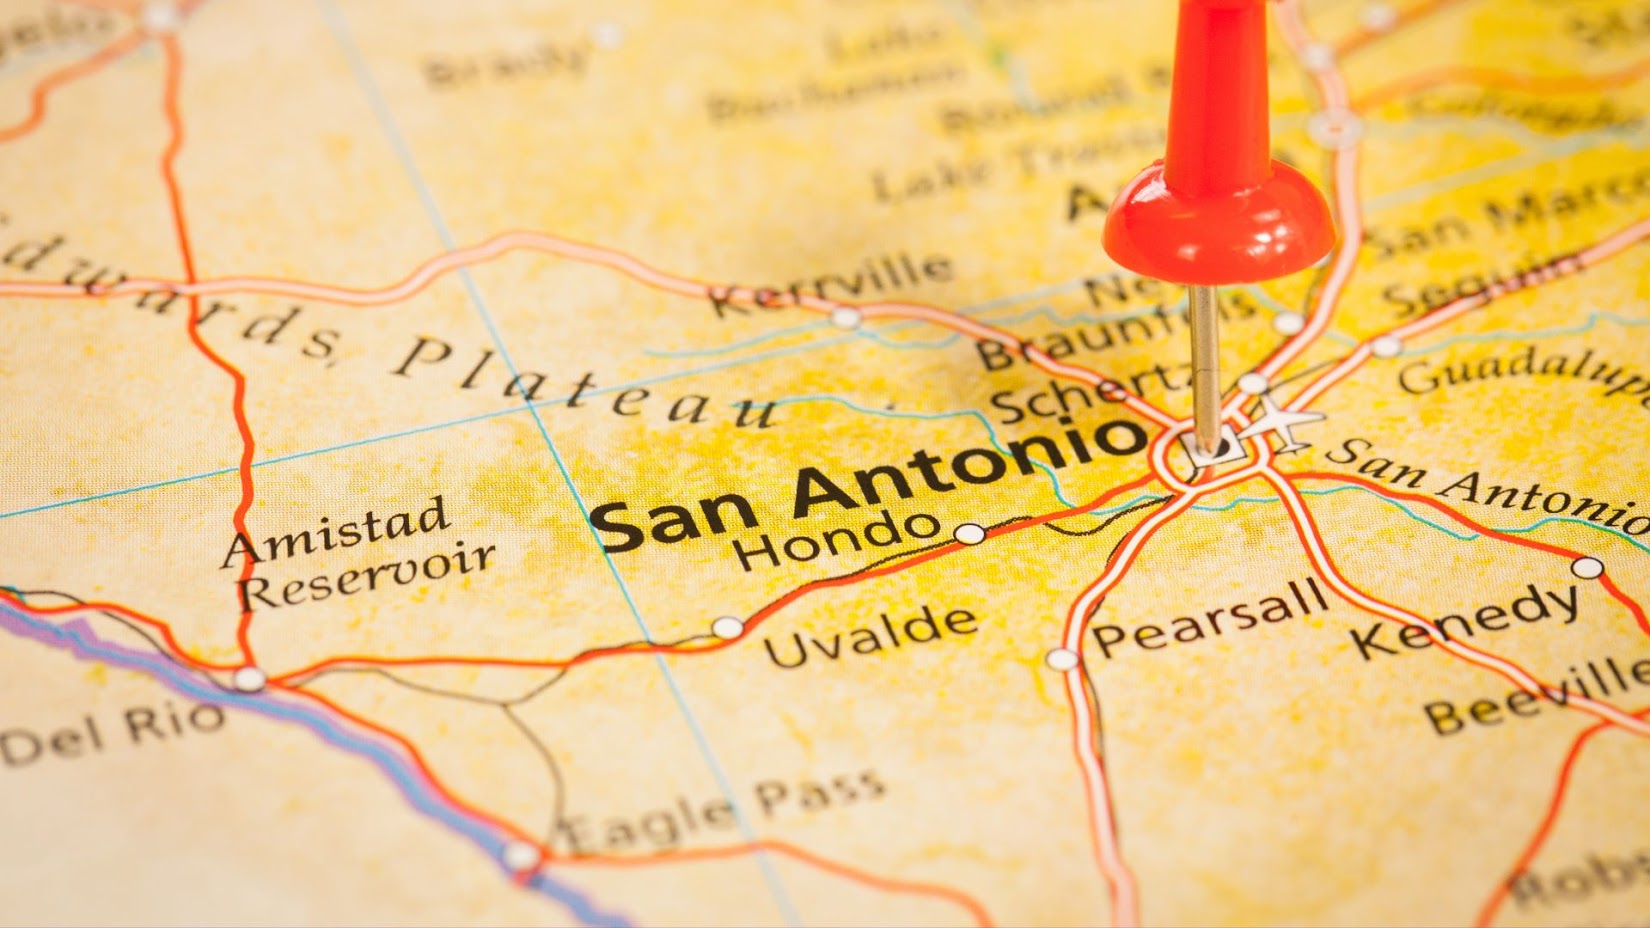 A large image that shows the location of one of the Pollo Campero franchise in San Antonio.